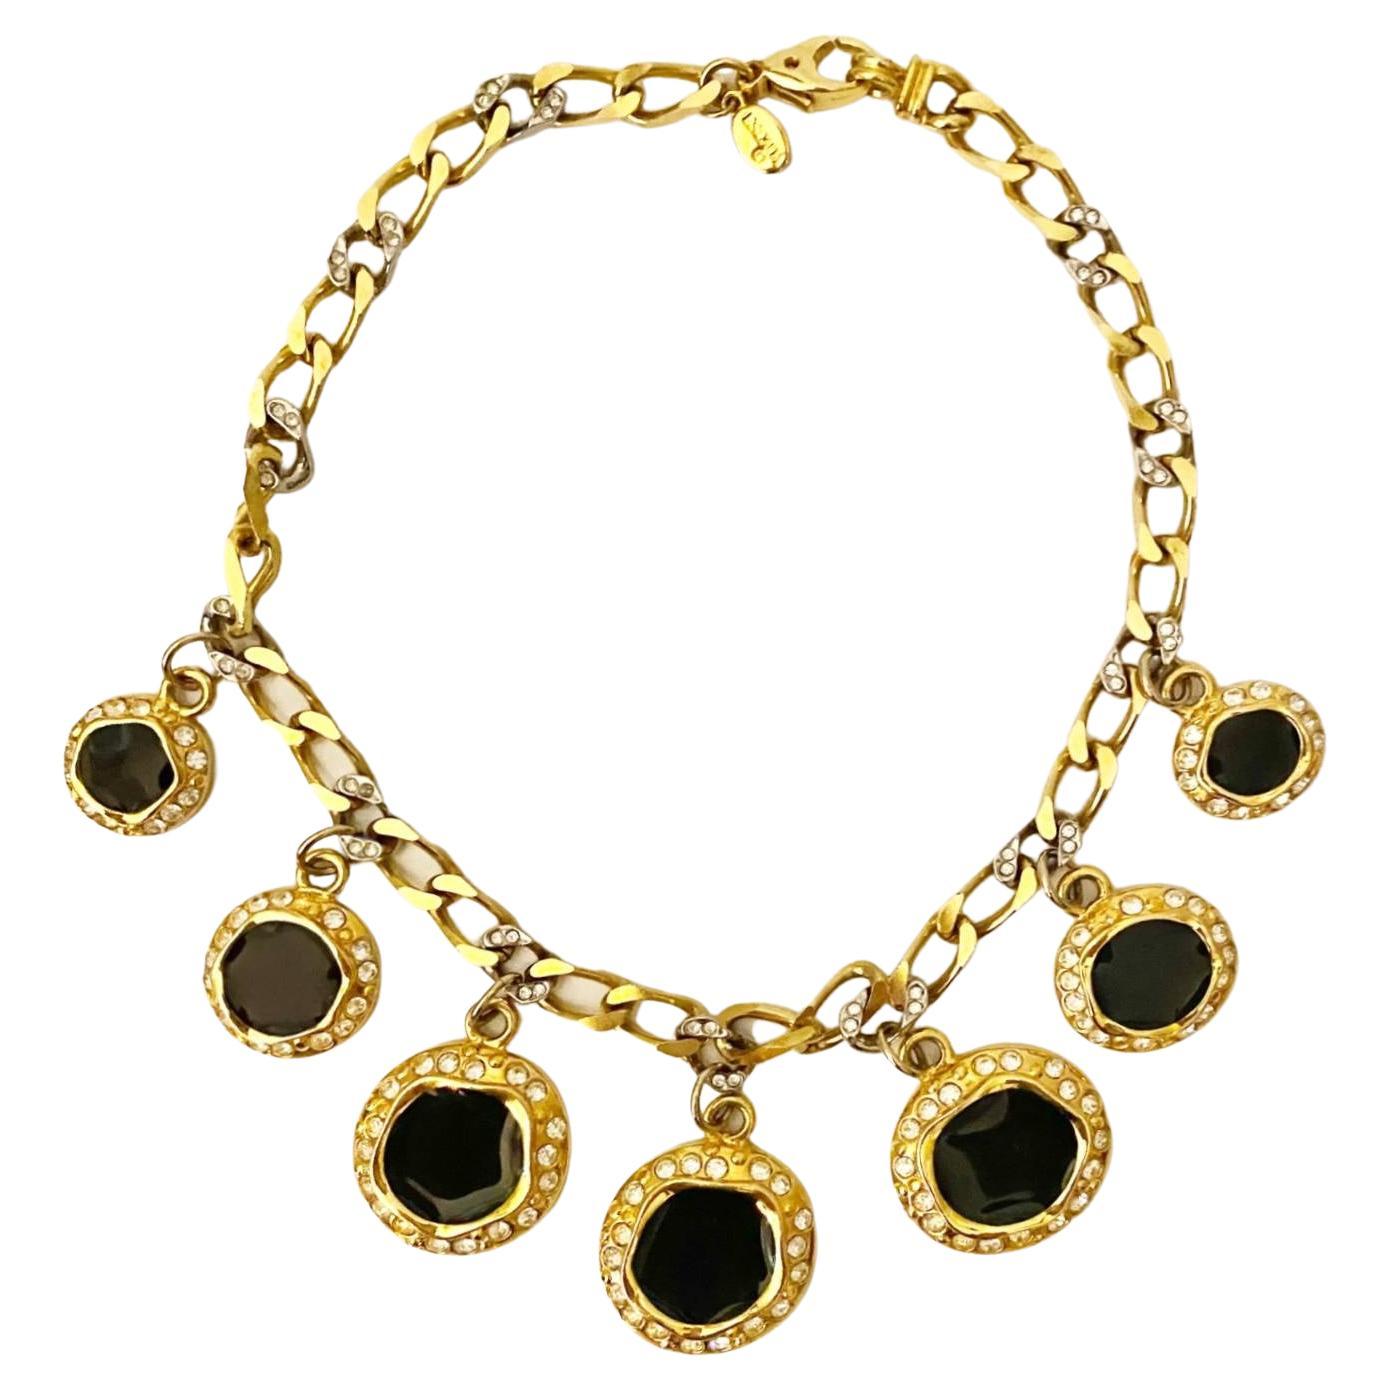 ESCADA Statement Chunky Necklace Enameled & Swarovski Rhinestones Gold Plated with silver tone chunky Link Chain, sparkly rhinestones

Measurements:  17” inch long 
Condition: 1980s, In very good condition